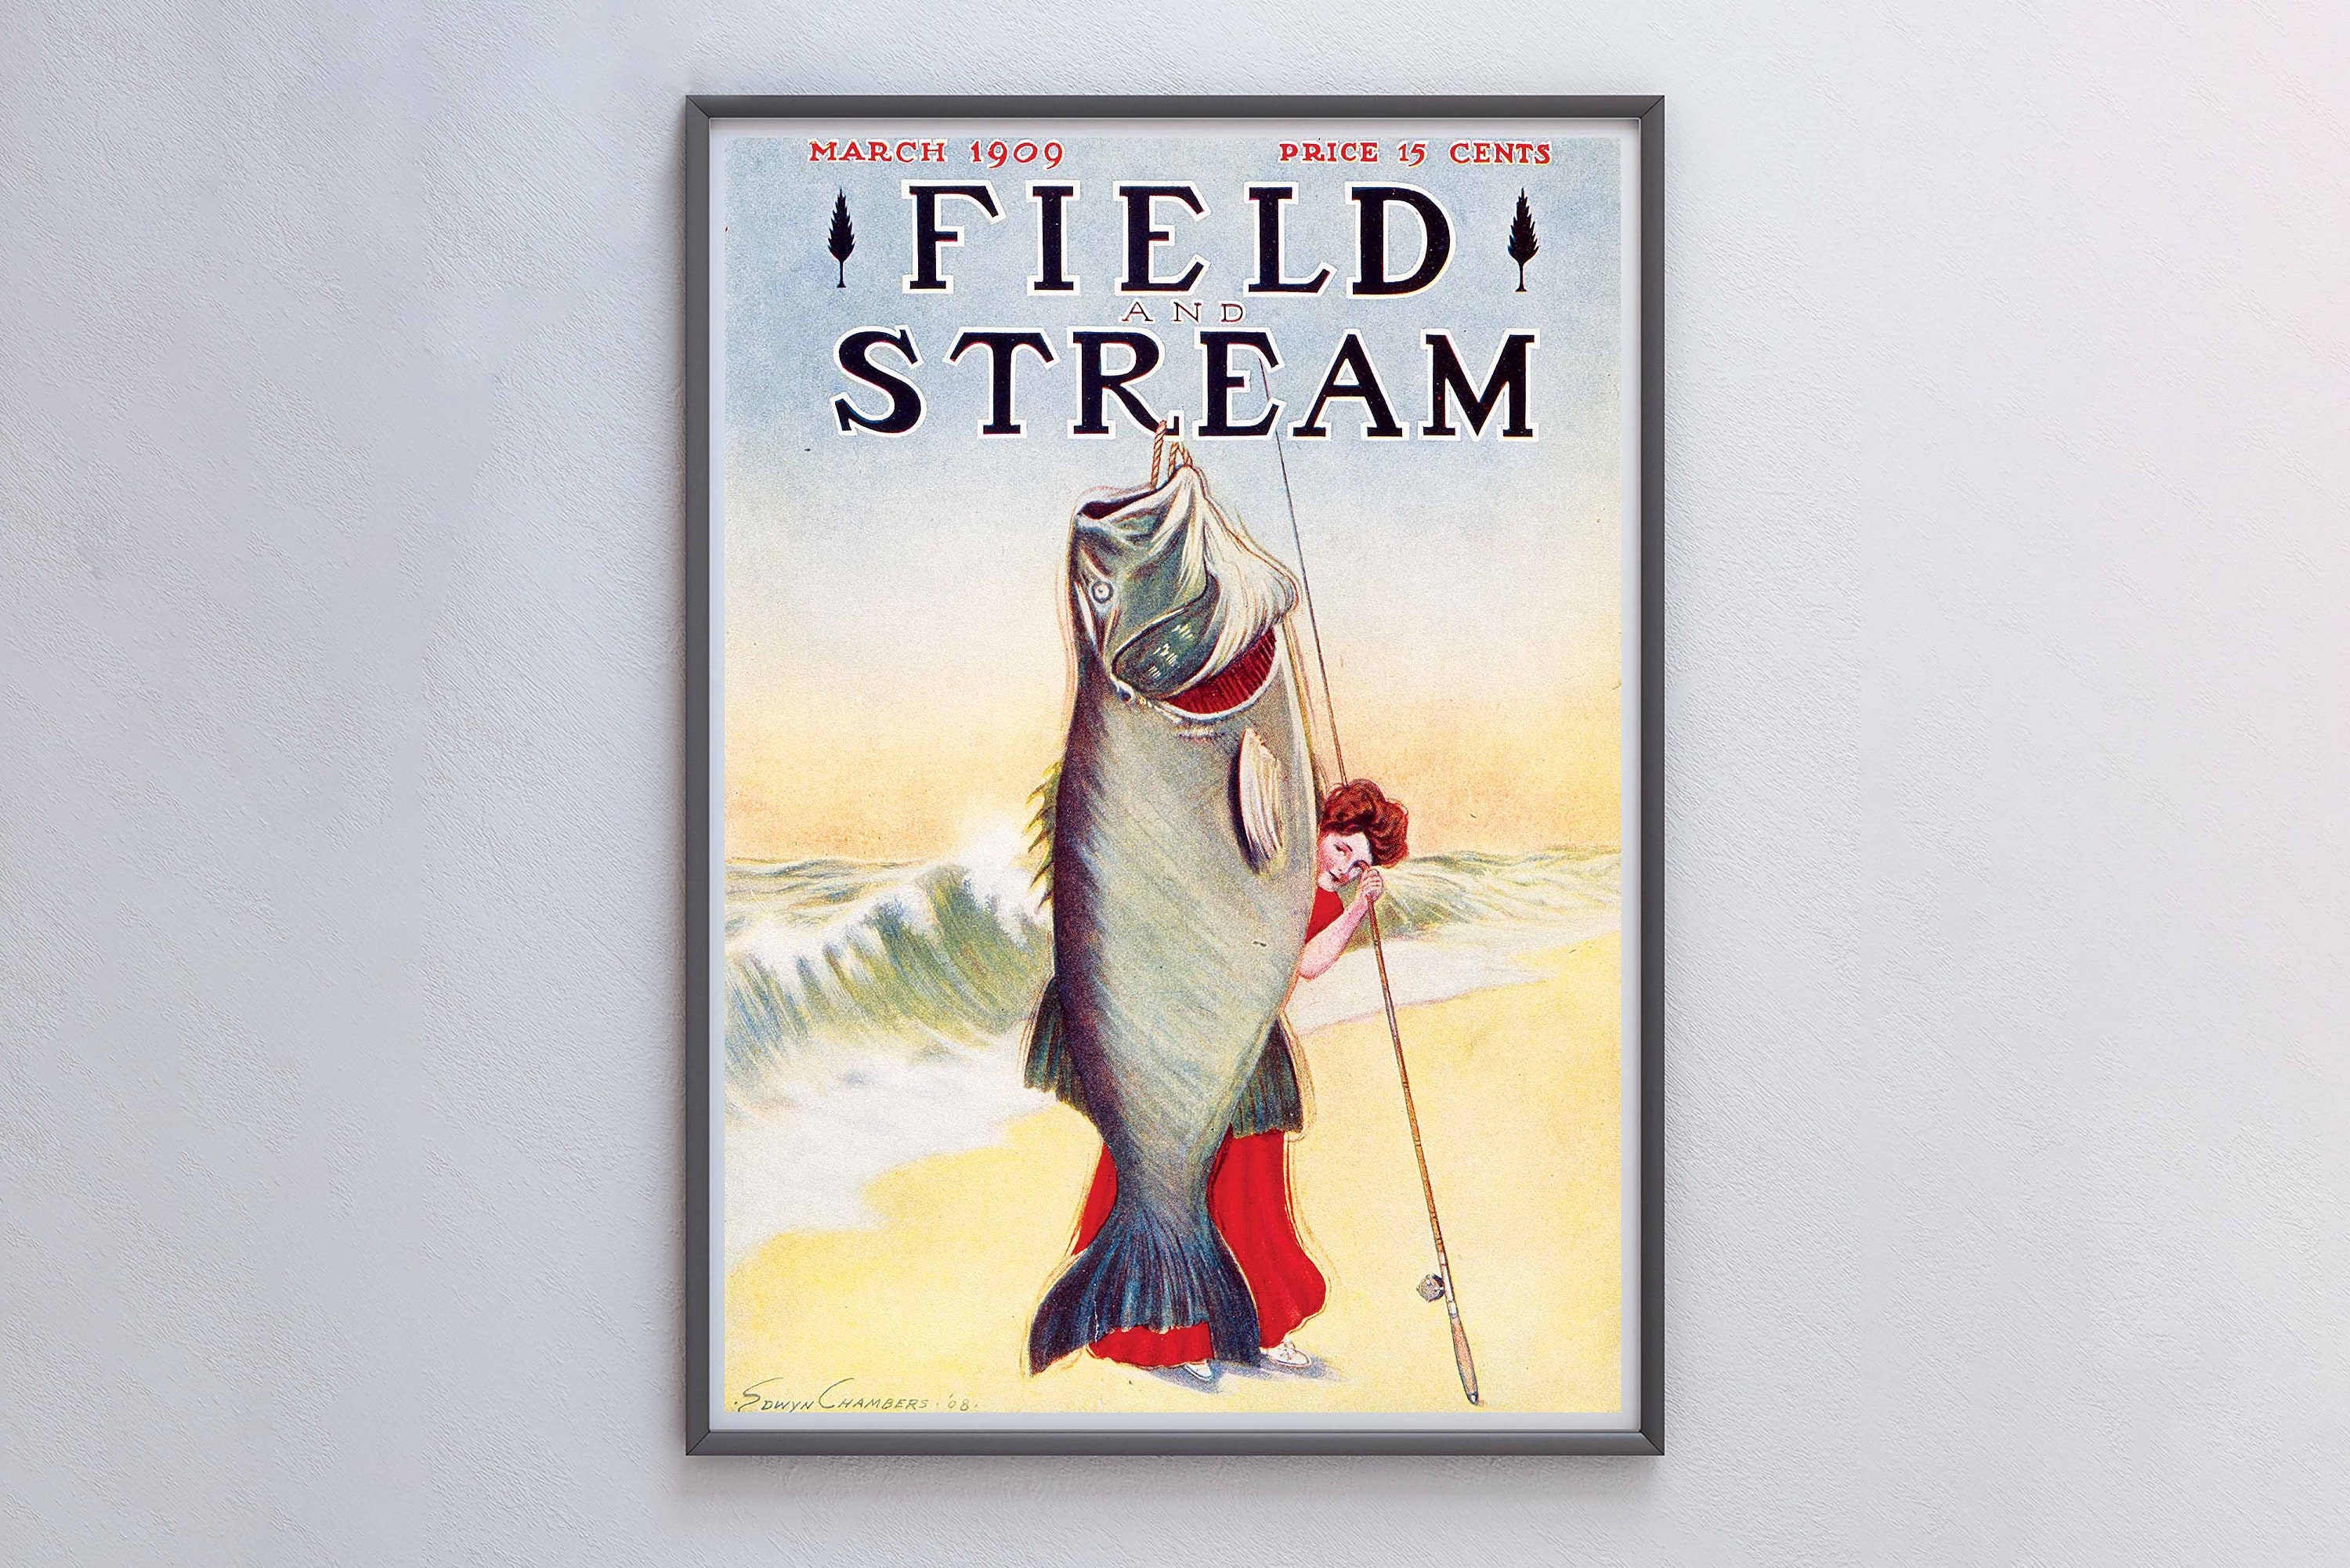 Field and Stream Poster 